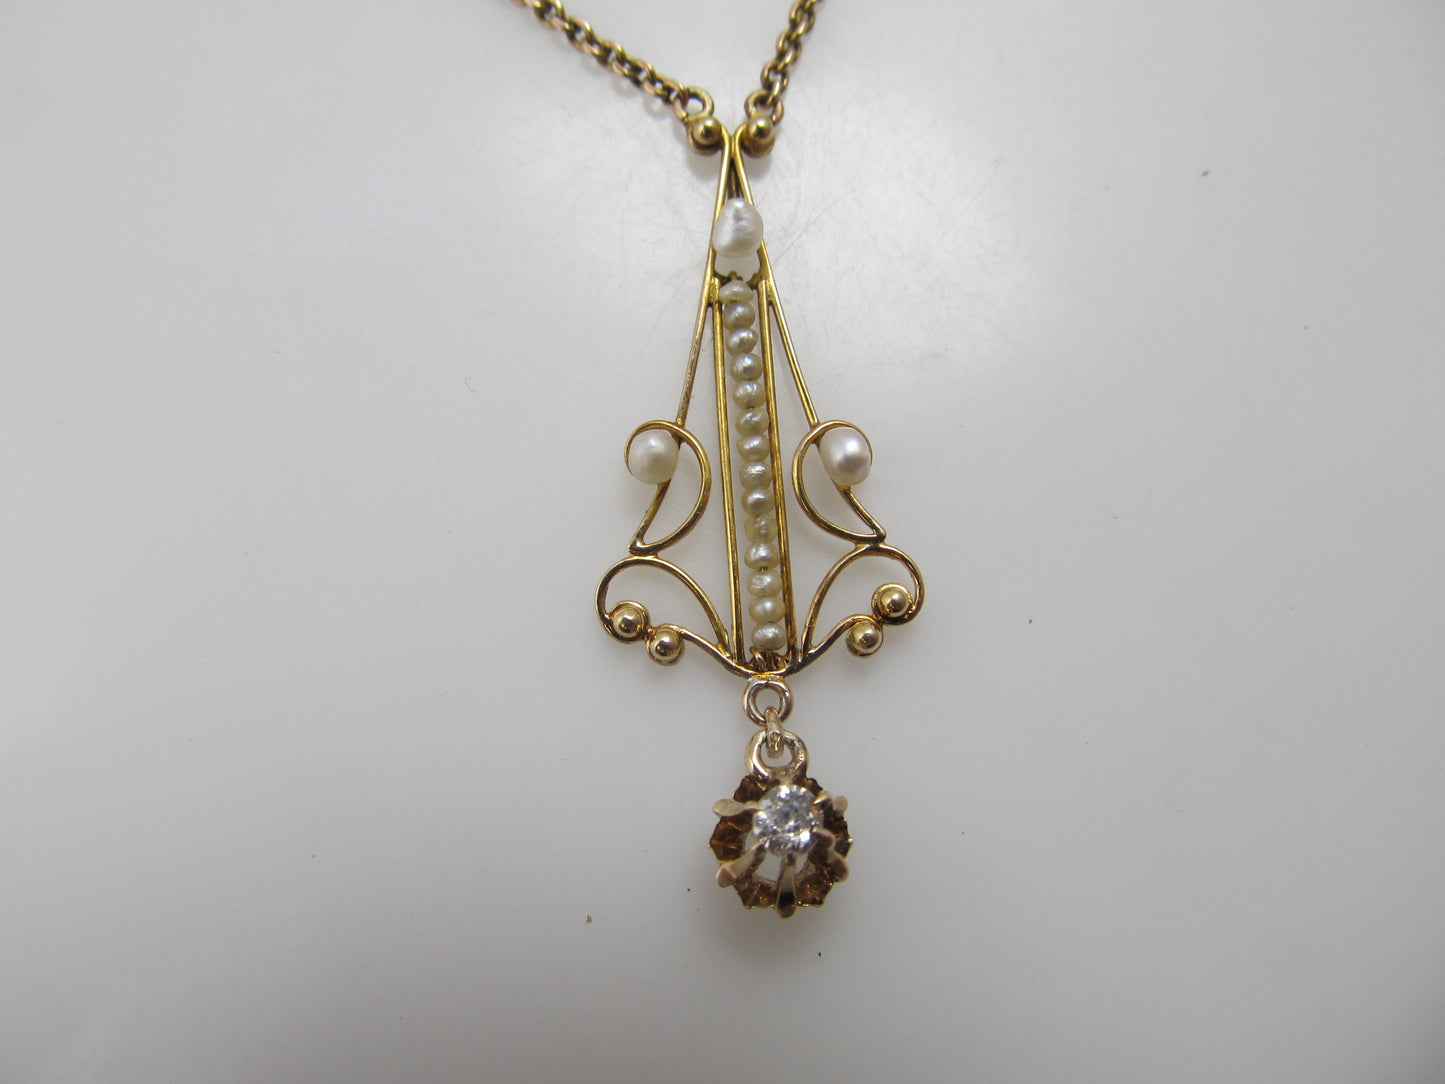 Edwardian pearl and diamond necklace